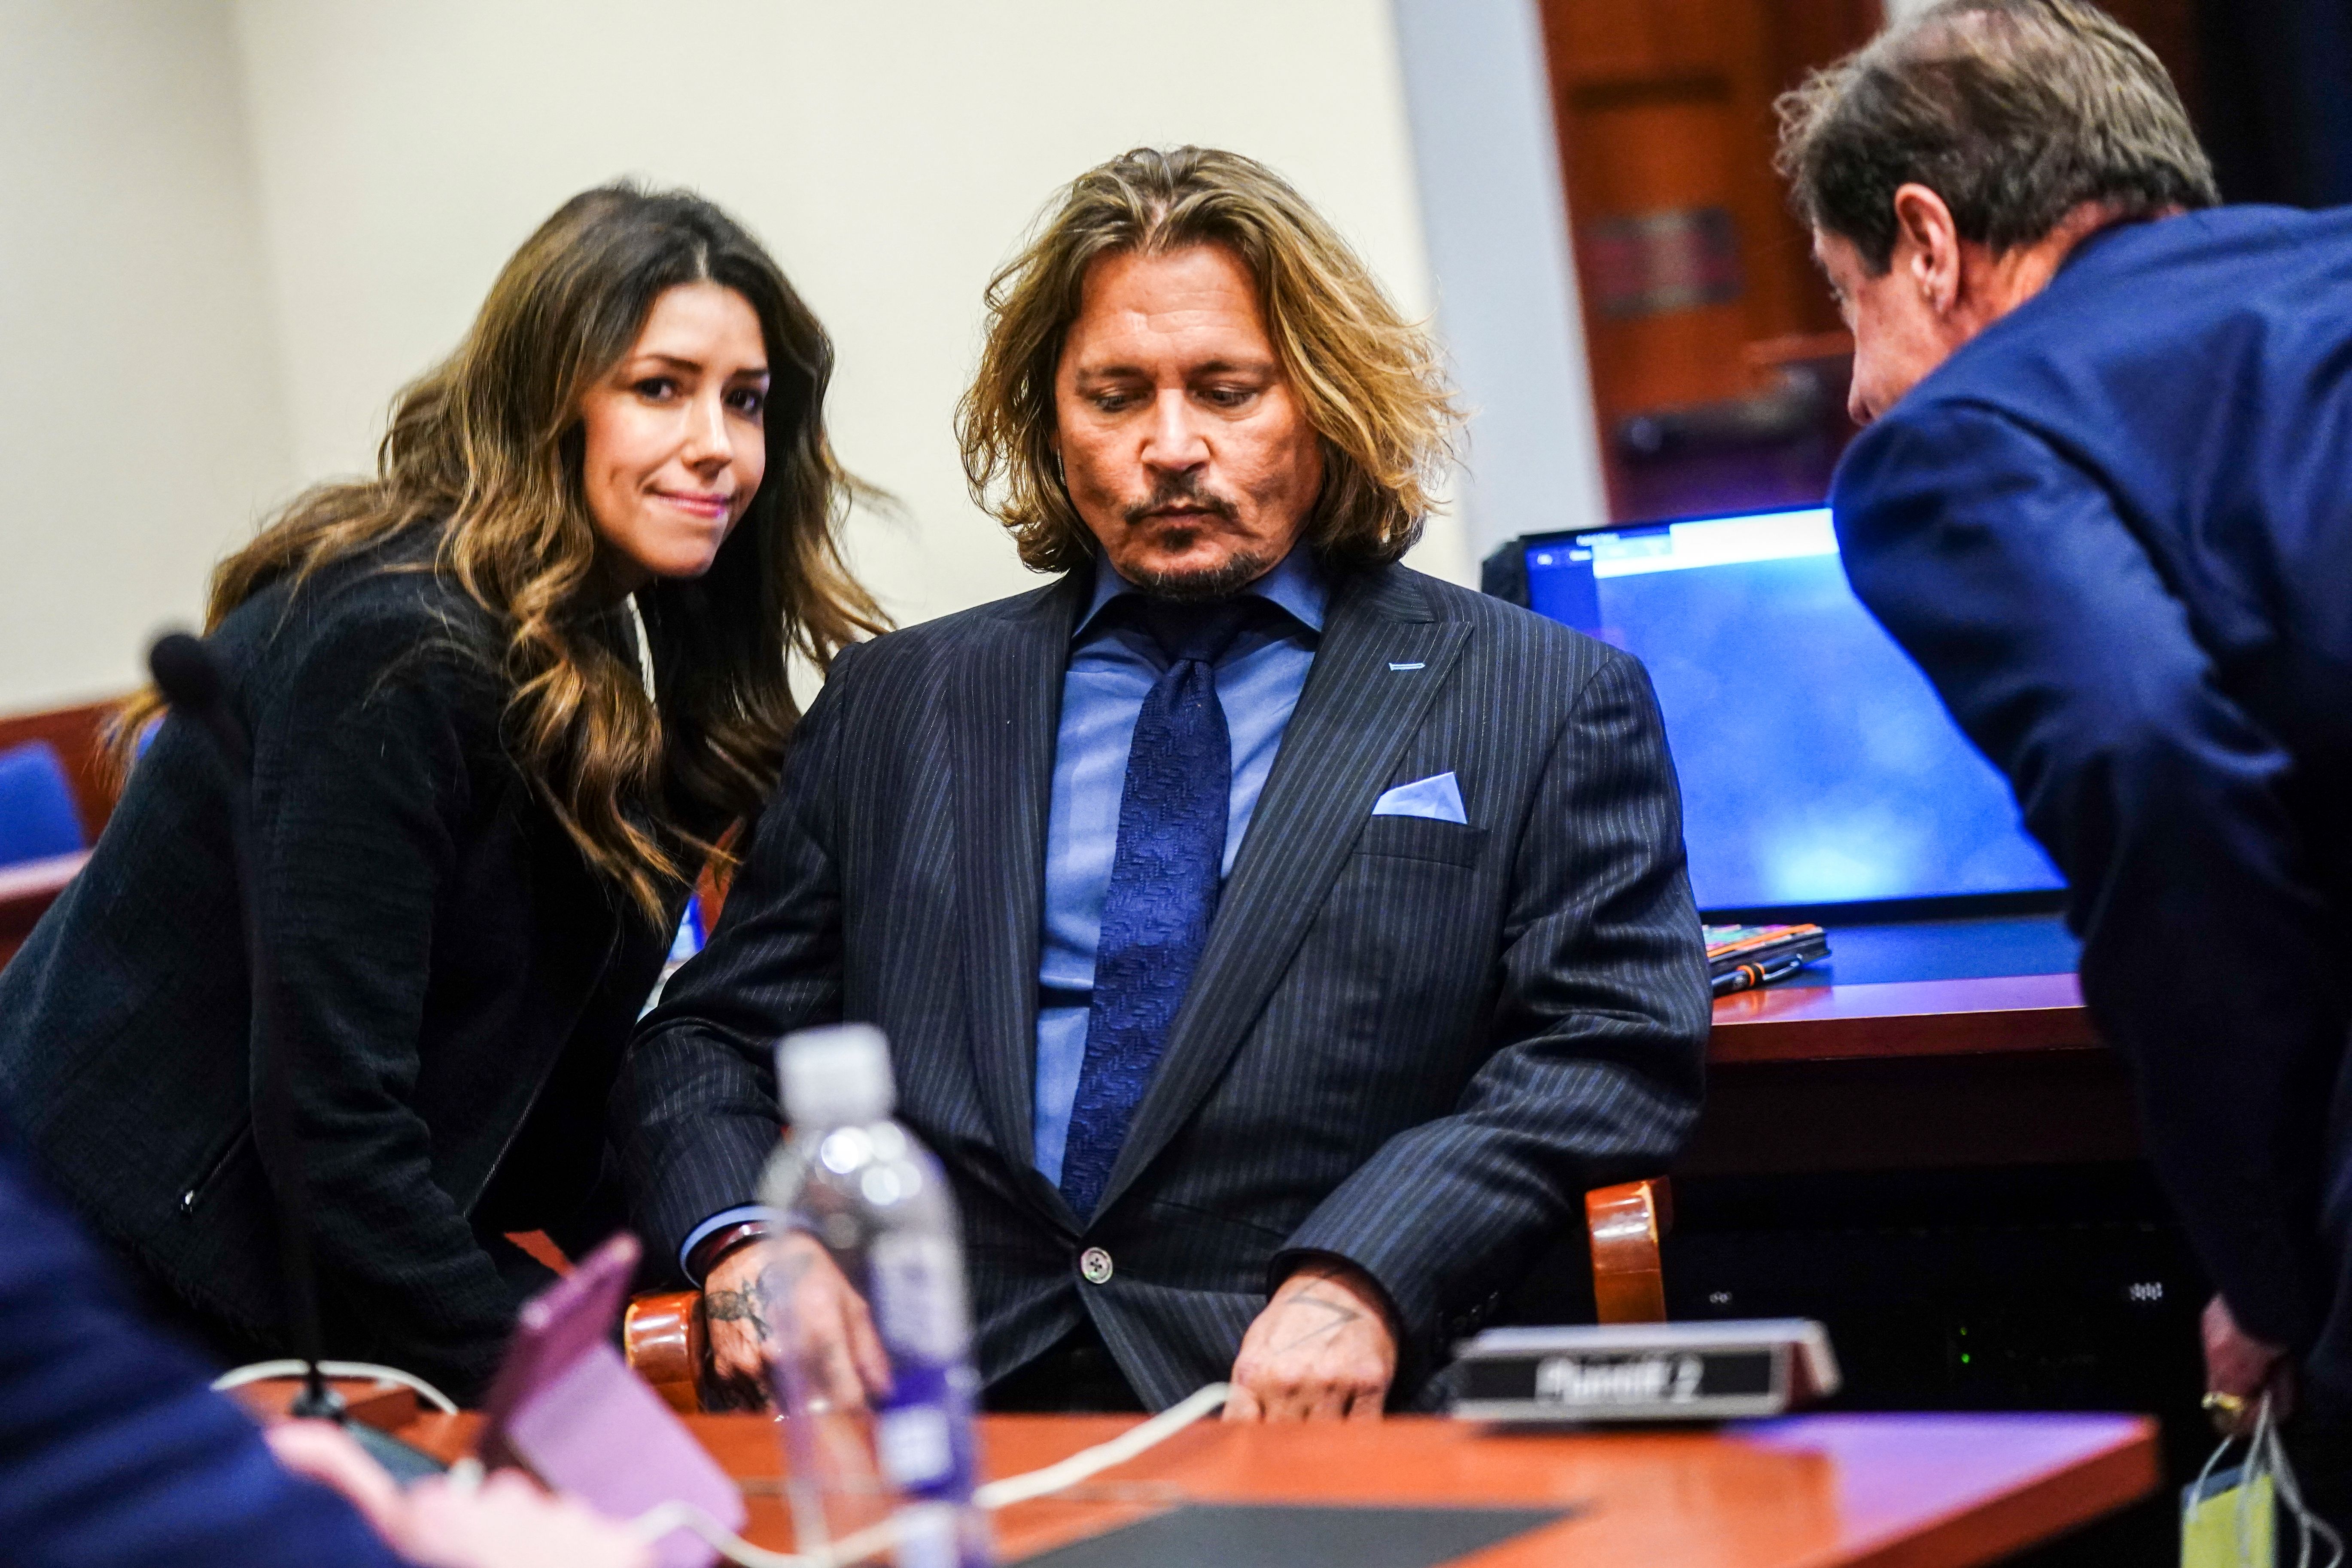 Johnny Depp listens to his legal team during the $50 million Depp vs Heard defamation trial at the Fairfax County Circuit Court in Fairfax, Virginia, on April 14, 2022. | Source: Getty Images